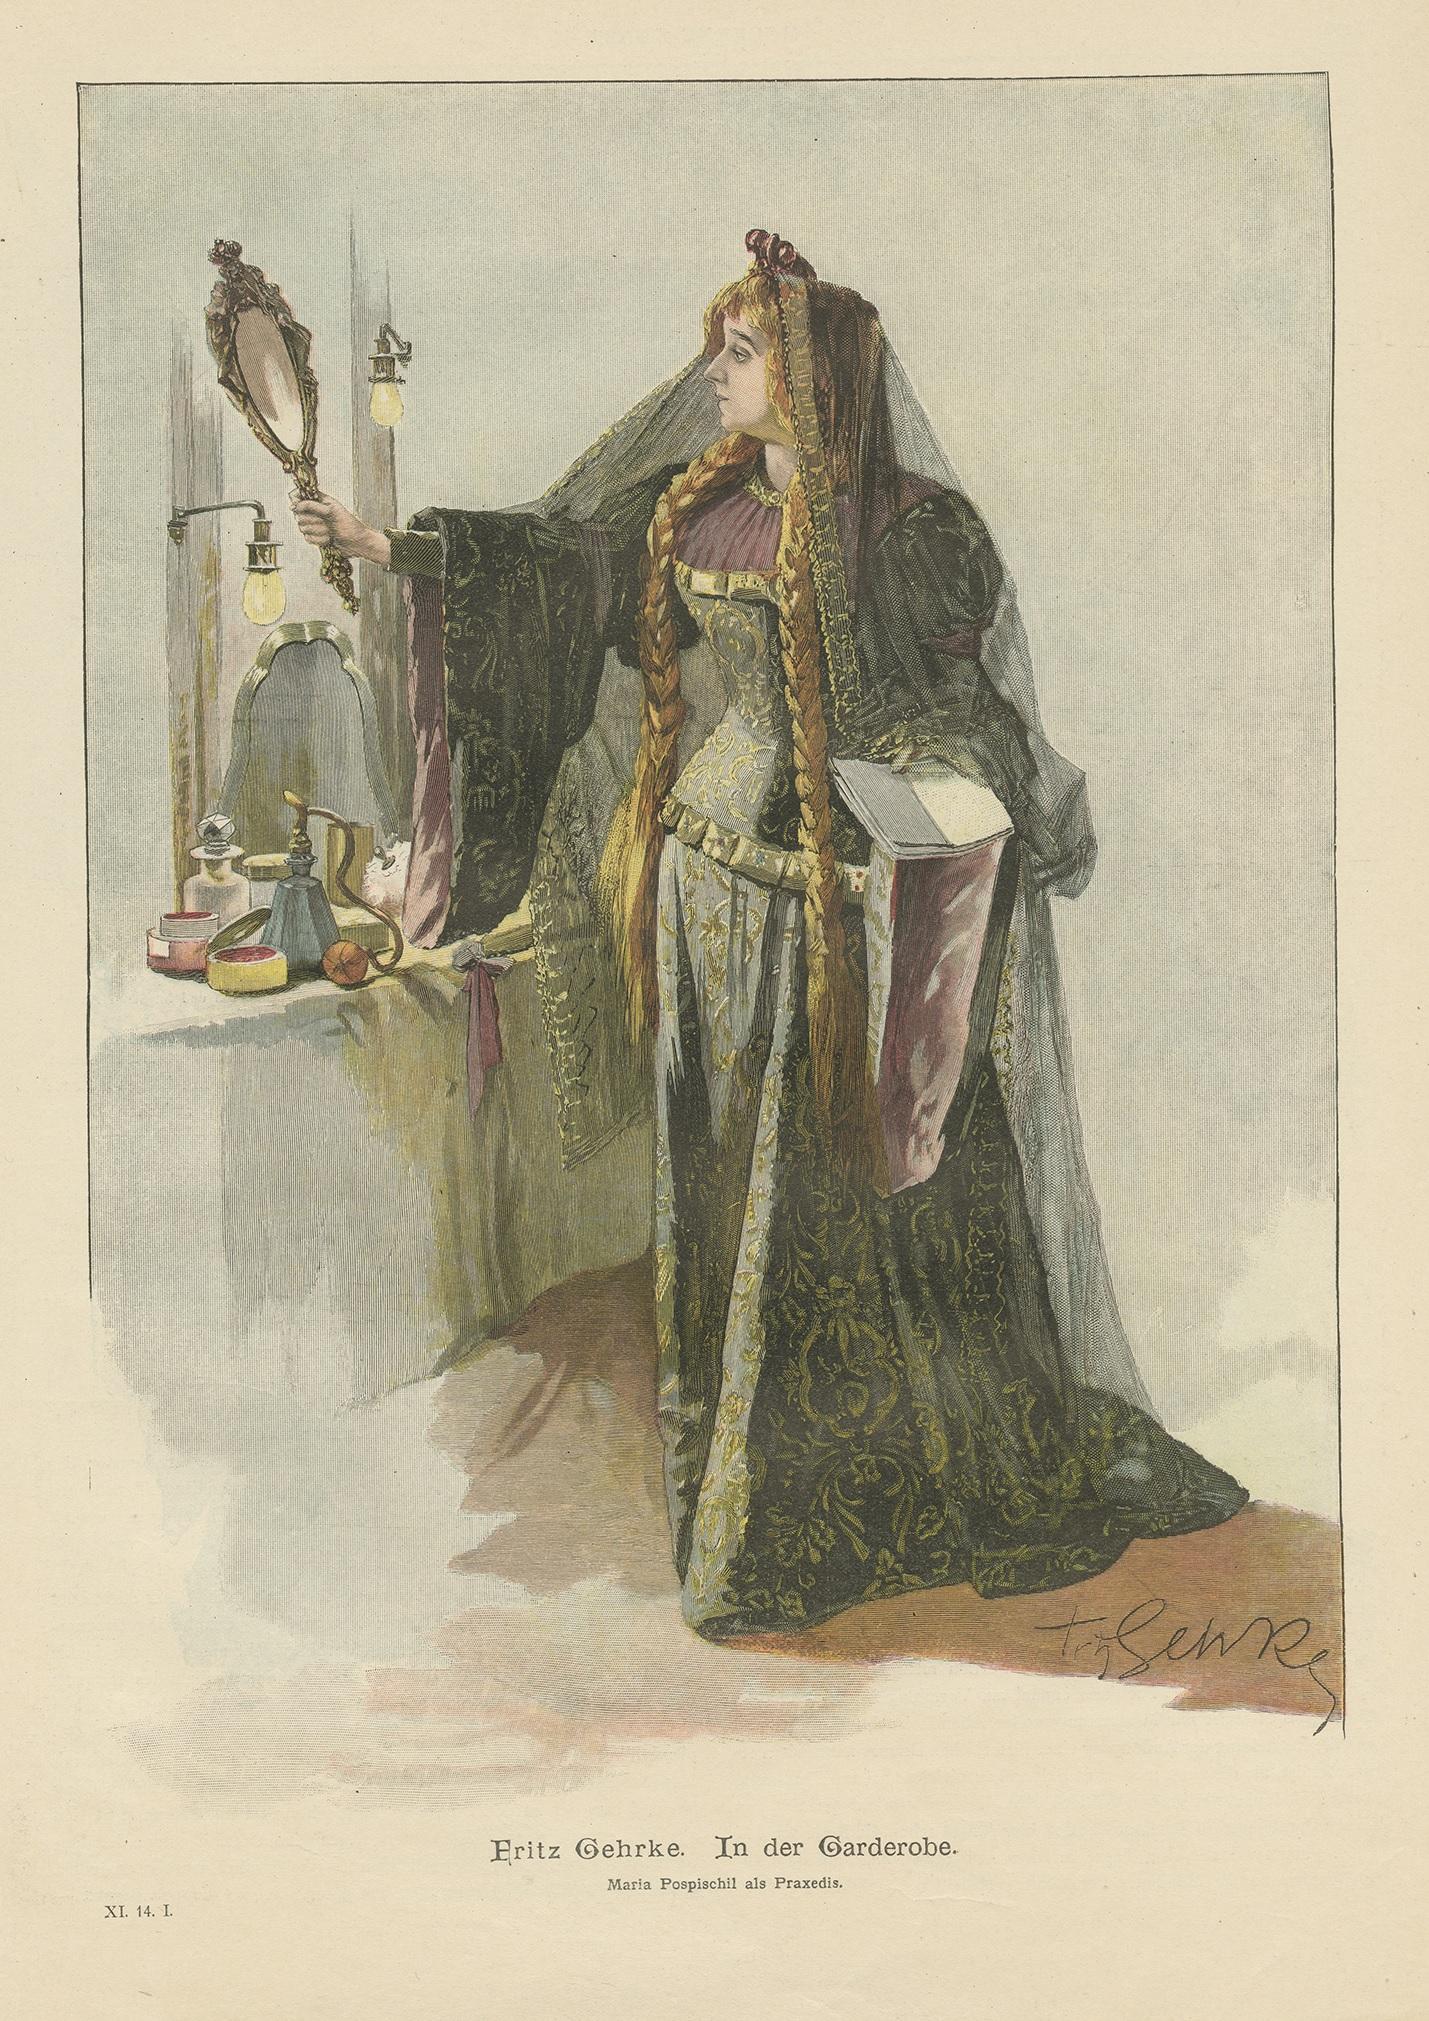 Antique print titled 'Fritz Gehrke. In der Garderobe, Maria Pospischil als Praxedis'. Wood engraving of a lady in a dressing room, made after Fritz Gehrke.